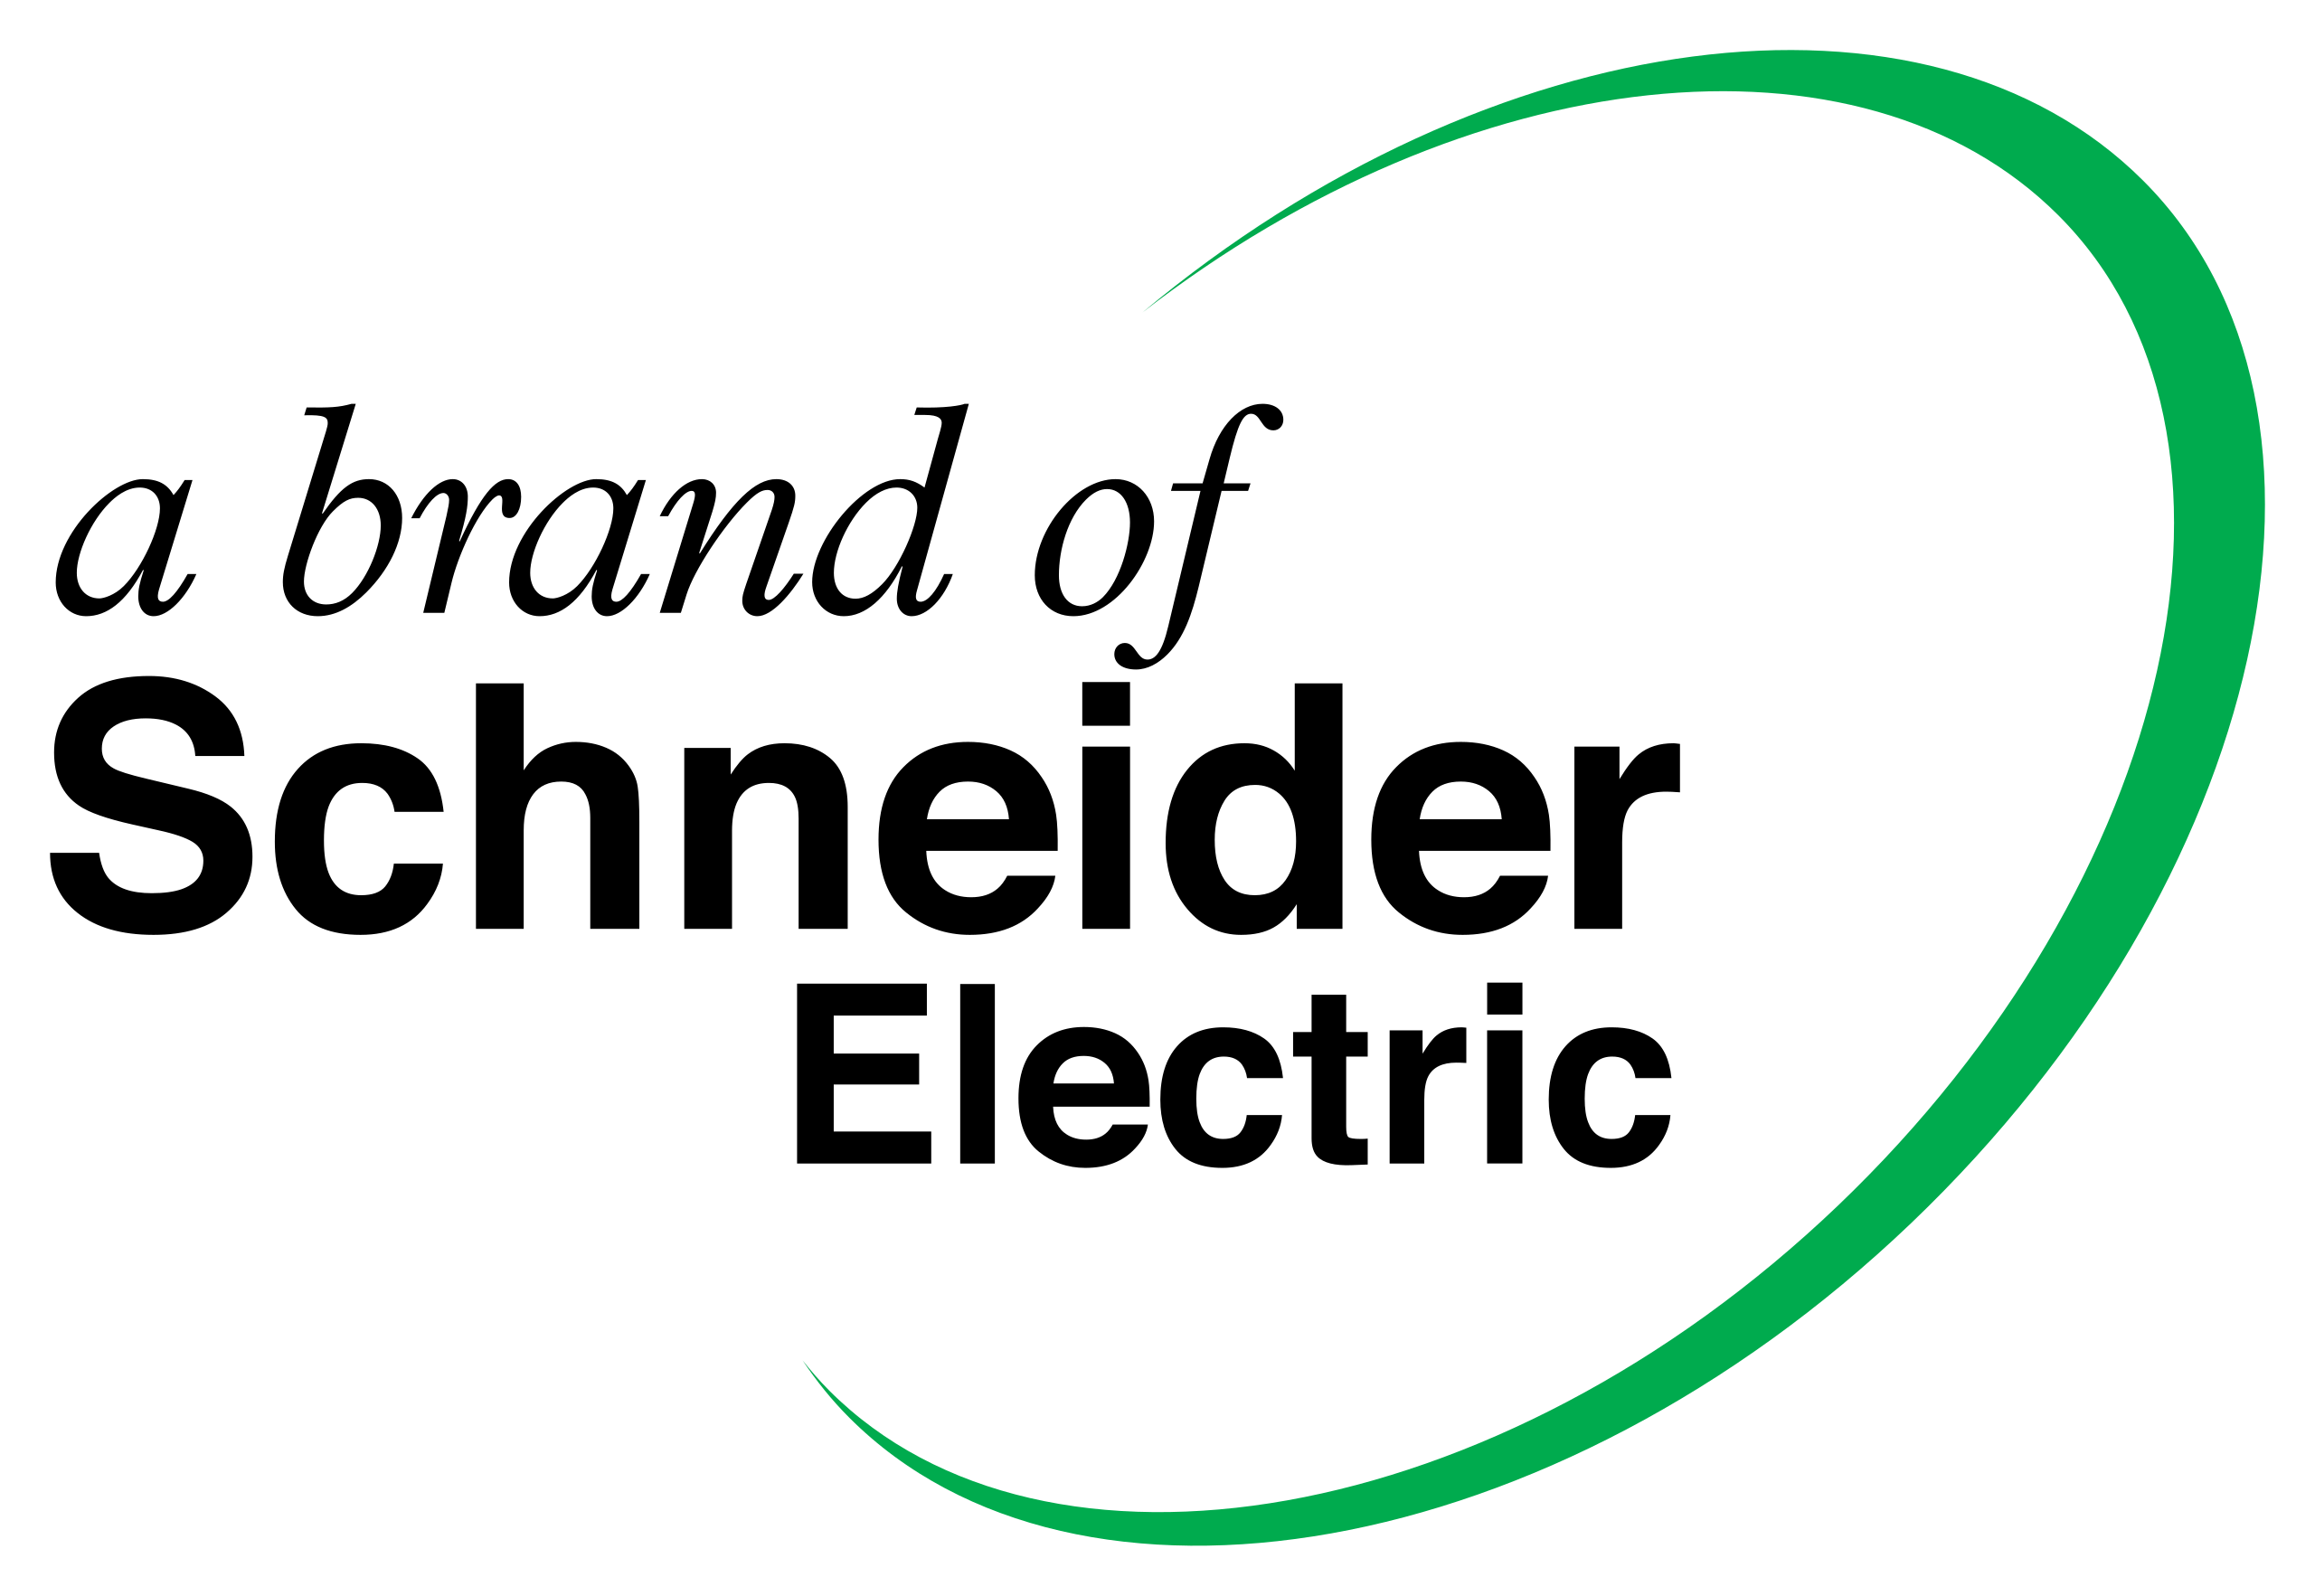 https://upload.wikimedia.org/wikipedia/commons/thumb/2/23/A_brand_of_Schneider_Electric_Logo.svg/2560px-A_brand_of_Schneider_Electric_Logo.svg.png